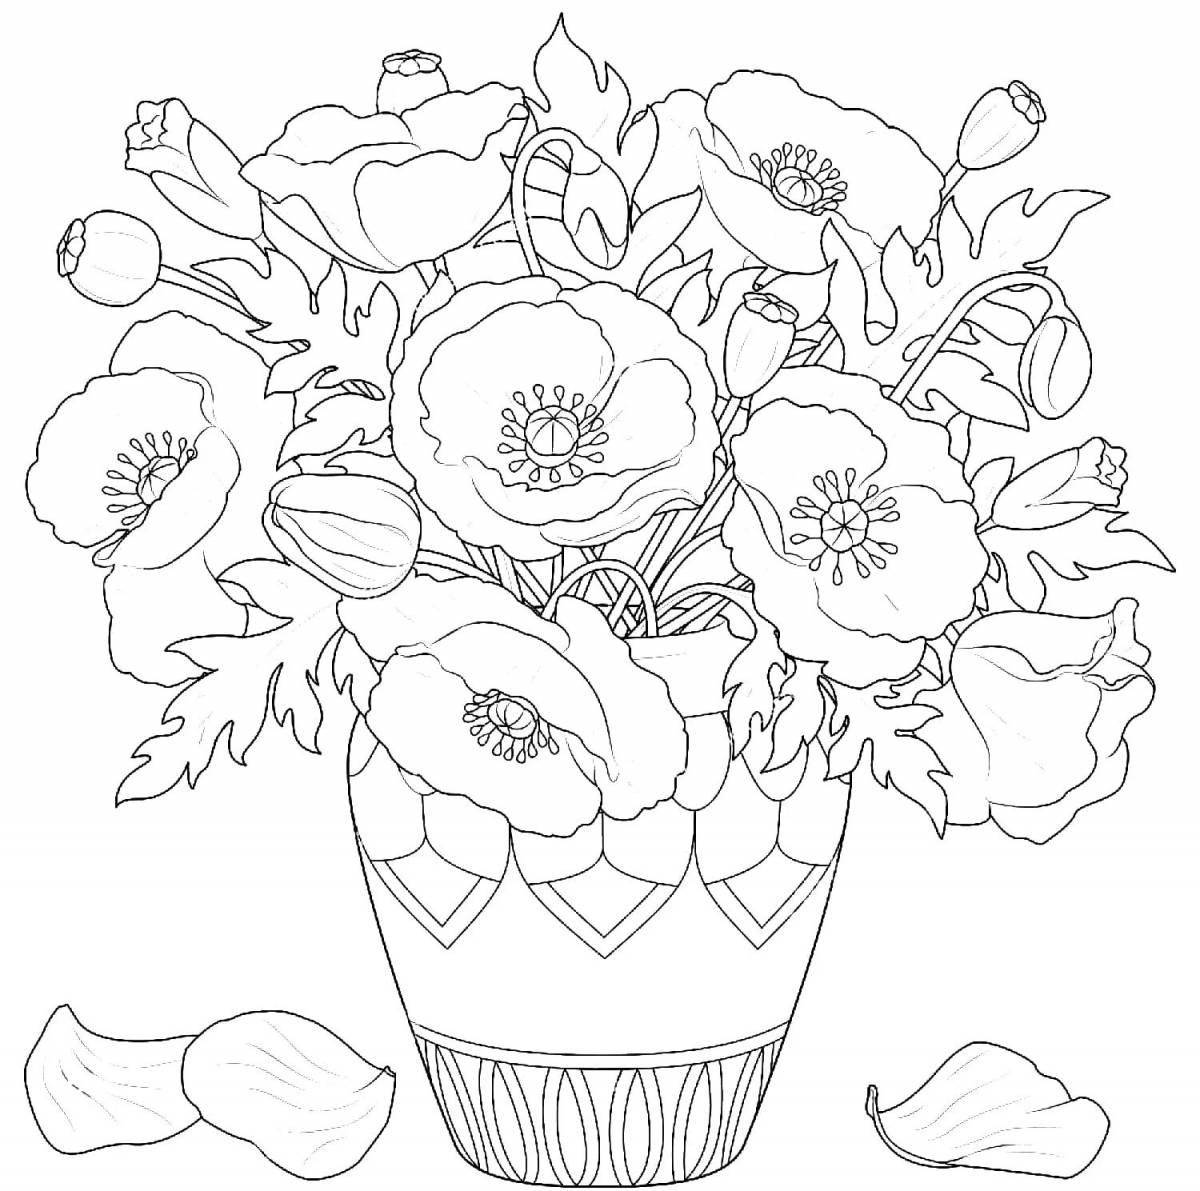 Adorable flower vase coloring book for 5-6 year olds